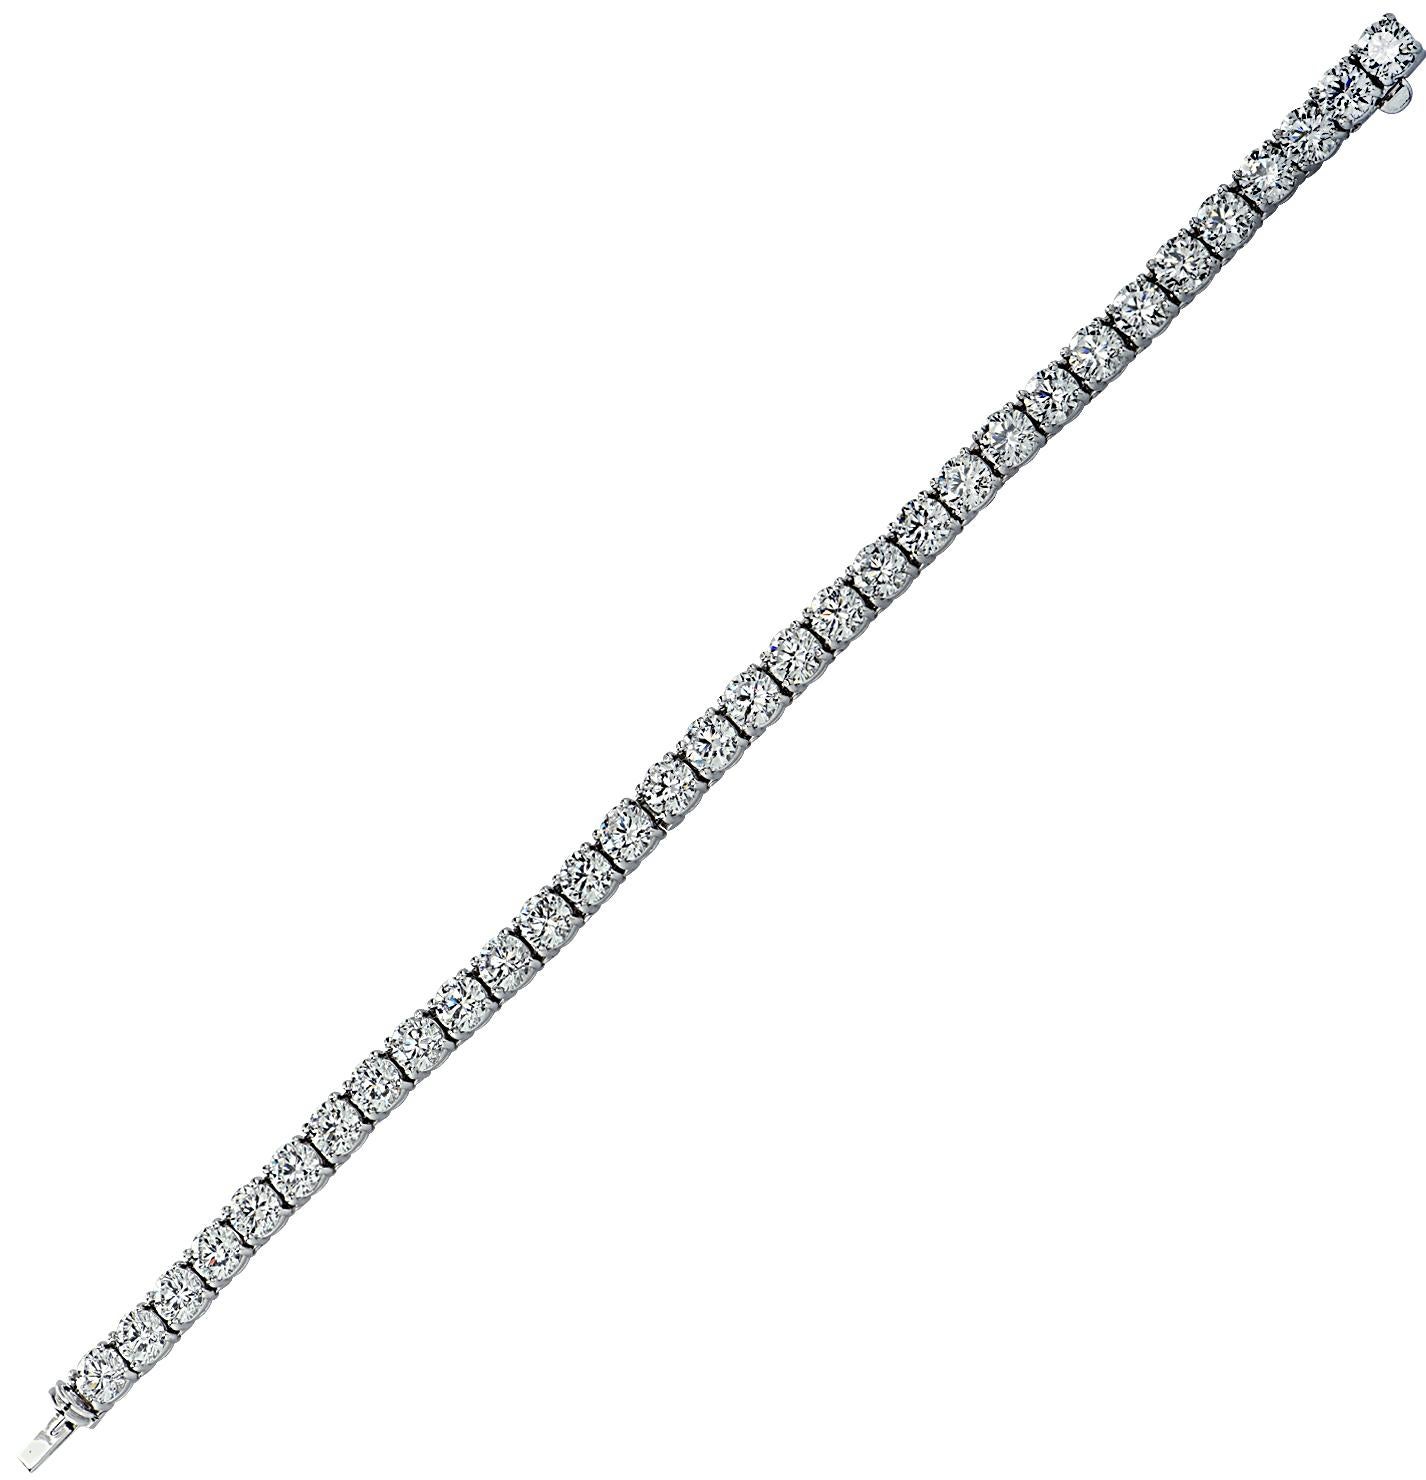 Spectacular Graff tennis bracelet crafted in platinum, featuring 32 sensational round brilliant cut diamonds weighing 16.32 carats total, F-H color, VVS-VS clarity. The radiance of each diamond is able to powerfully radiate, creating a stream of